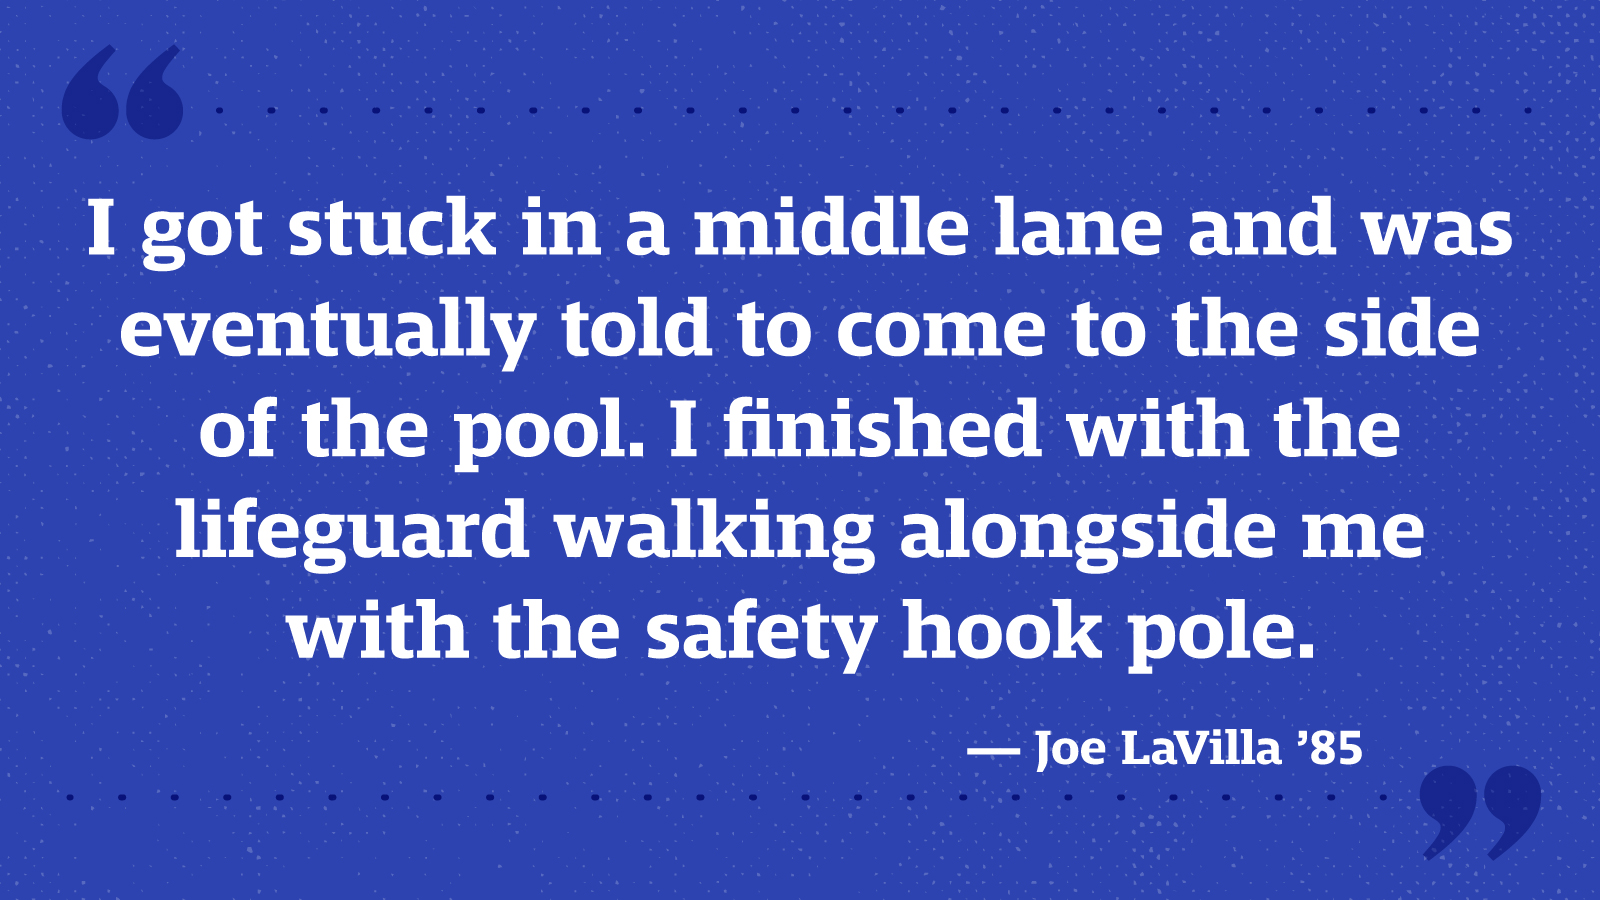 I got stuck in a middle lane and was eventually told to come to the side of the pool. I finished with the lifeguard walking alongside me with the safety hook pole. — Joe LaVilla ’85